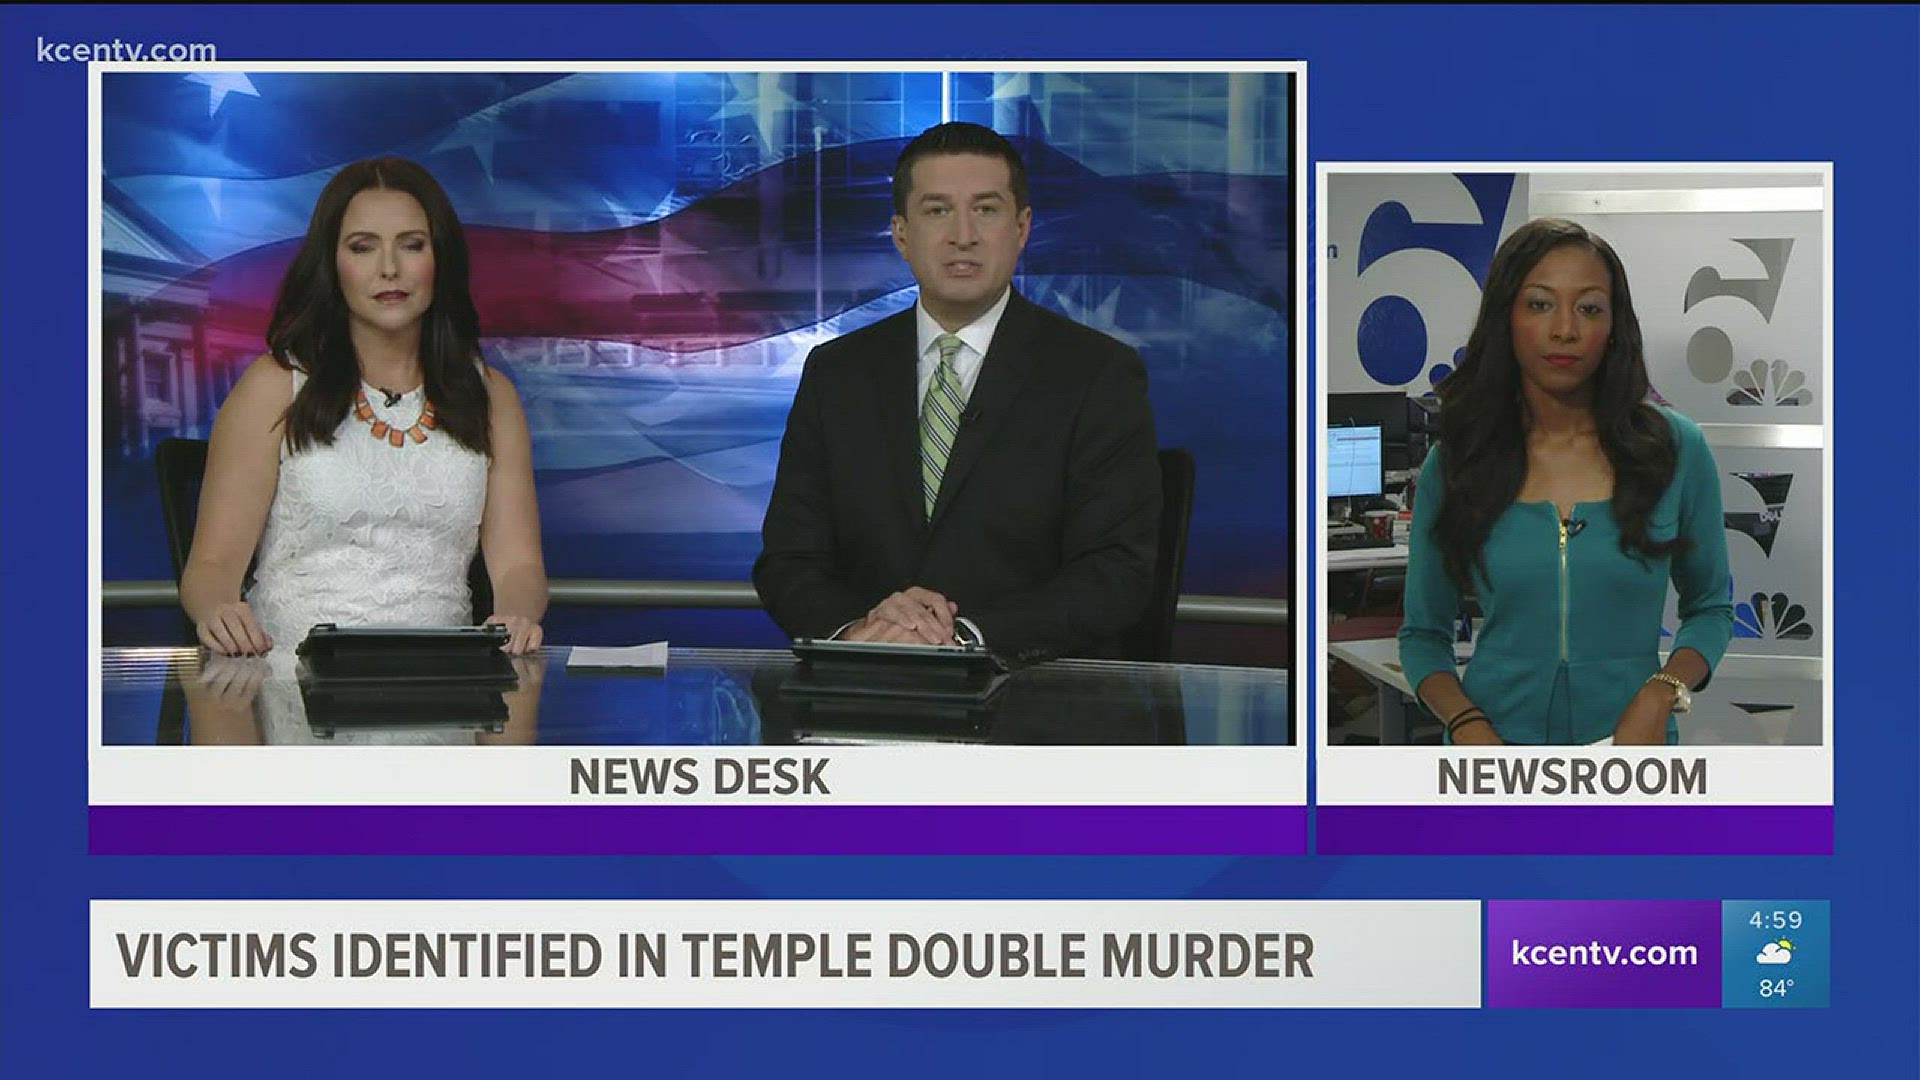 Victims identified in Temple double murder